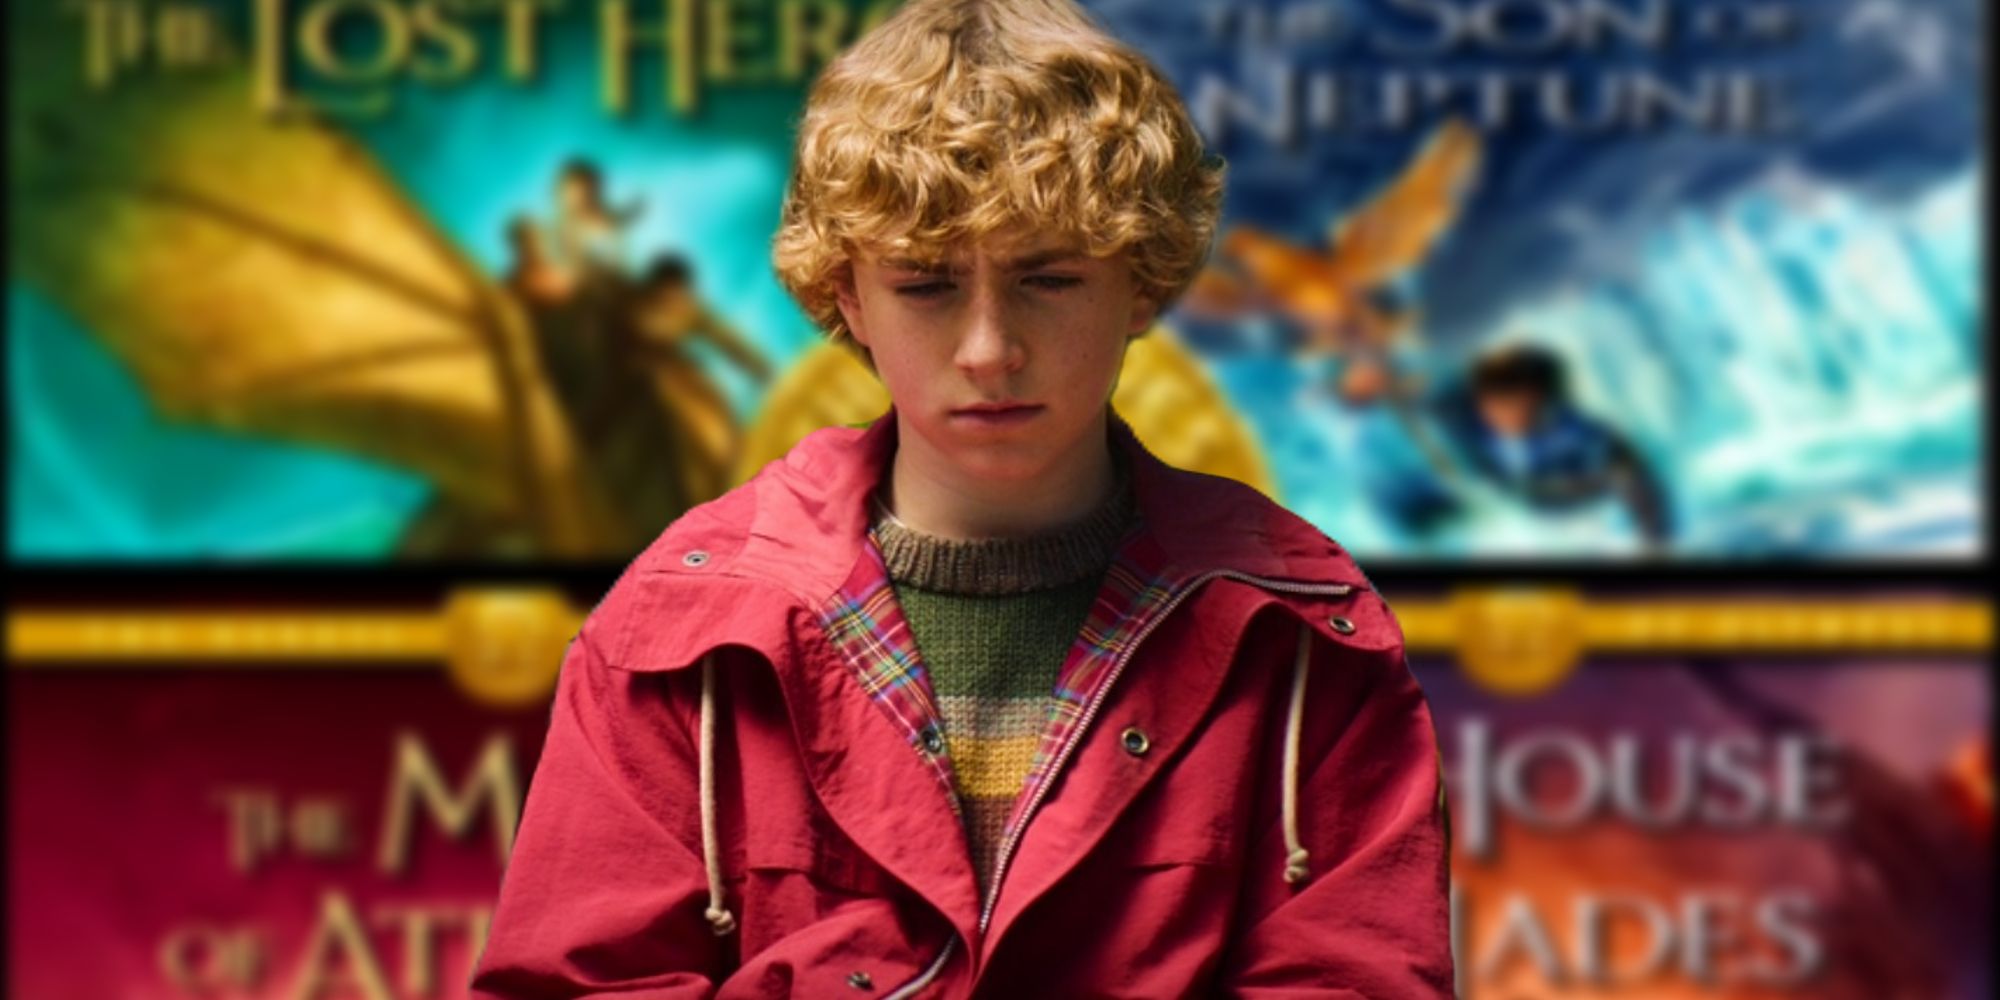 Walker Scobell as Percy Jackson from the TV show on top of a blurred image of the Heroes of Olympus book series